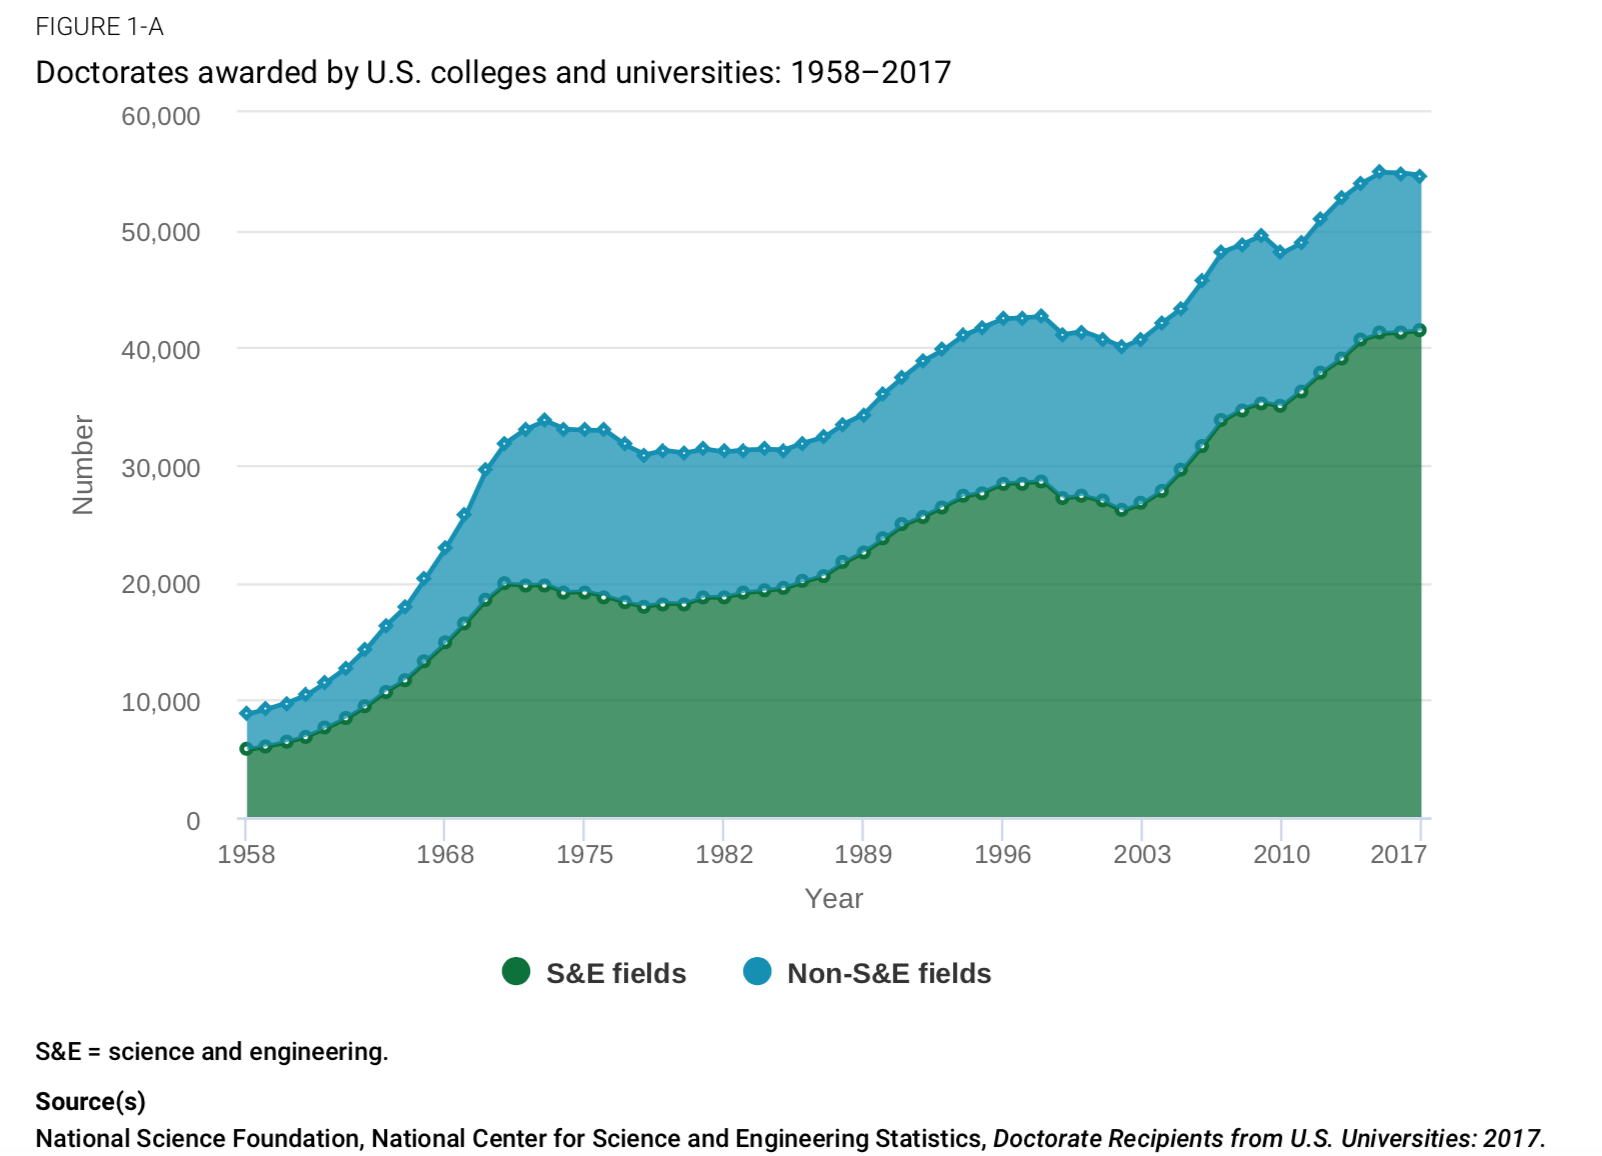 Doctorates awarded by U.S. colleges and universities: 1958–2017. The number of research doctorate degrees awarded by U.S. institutions in 2017 declined slightly to 54,664, according to the Survey of Earned Doctorates (SED). Over time, the number of doctorates awarded shows a strong upward trend—average annual growth of 3.3%—punctuated by periods of slow growth and even decline.  Since the SED began collecting data in 1957, the number of research doctorates awarded in science and engineering (S&E) fields has exceeded the number of non-S&E doctorates, and the gap has widened. From 1977 to 2017, the number of S&E doctorate recipients has more than doubled, while the number of non-S&E doctorates awarded in 2017 was slightly lower than the 1977 count. As a result, the proportion of S&E doctorates climbed from 58% in 1977 to 76% in 2017.